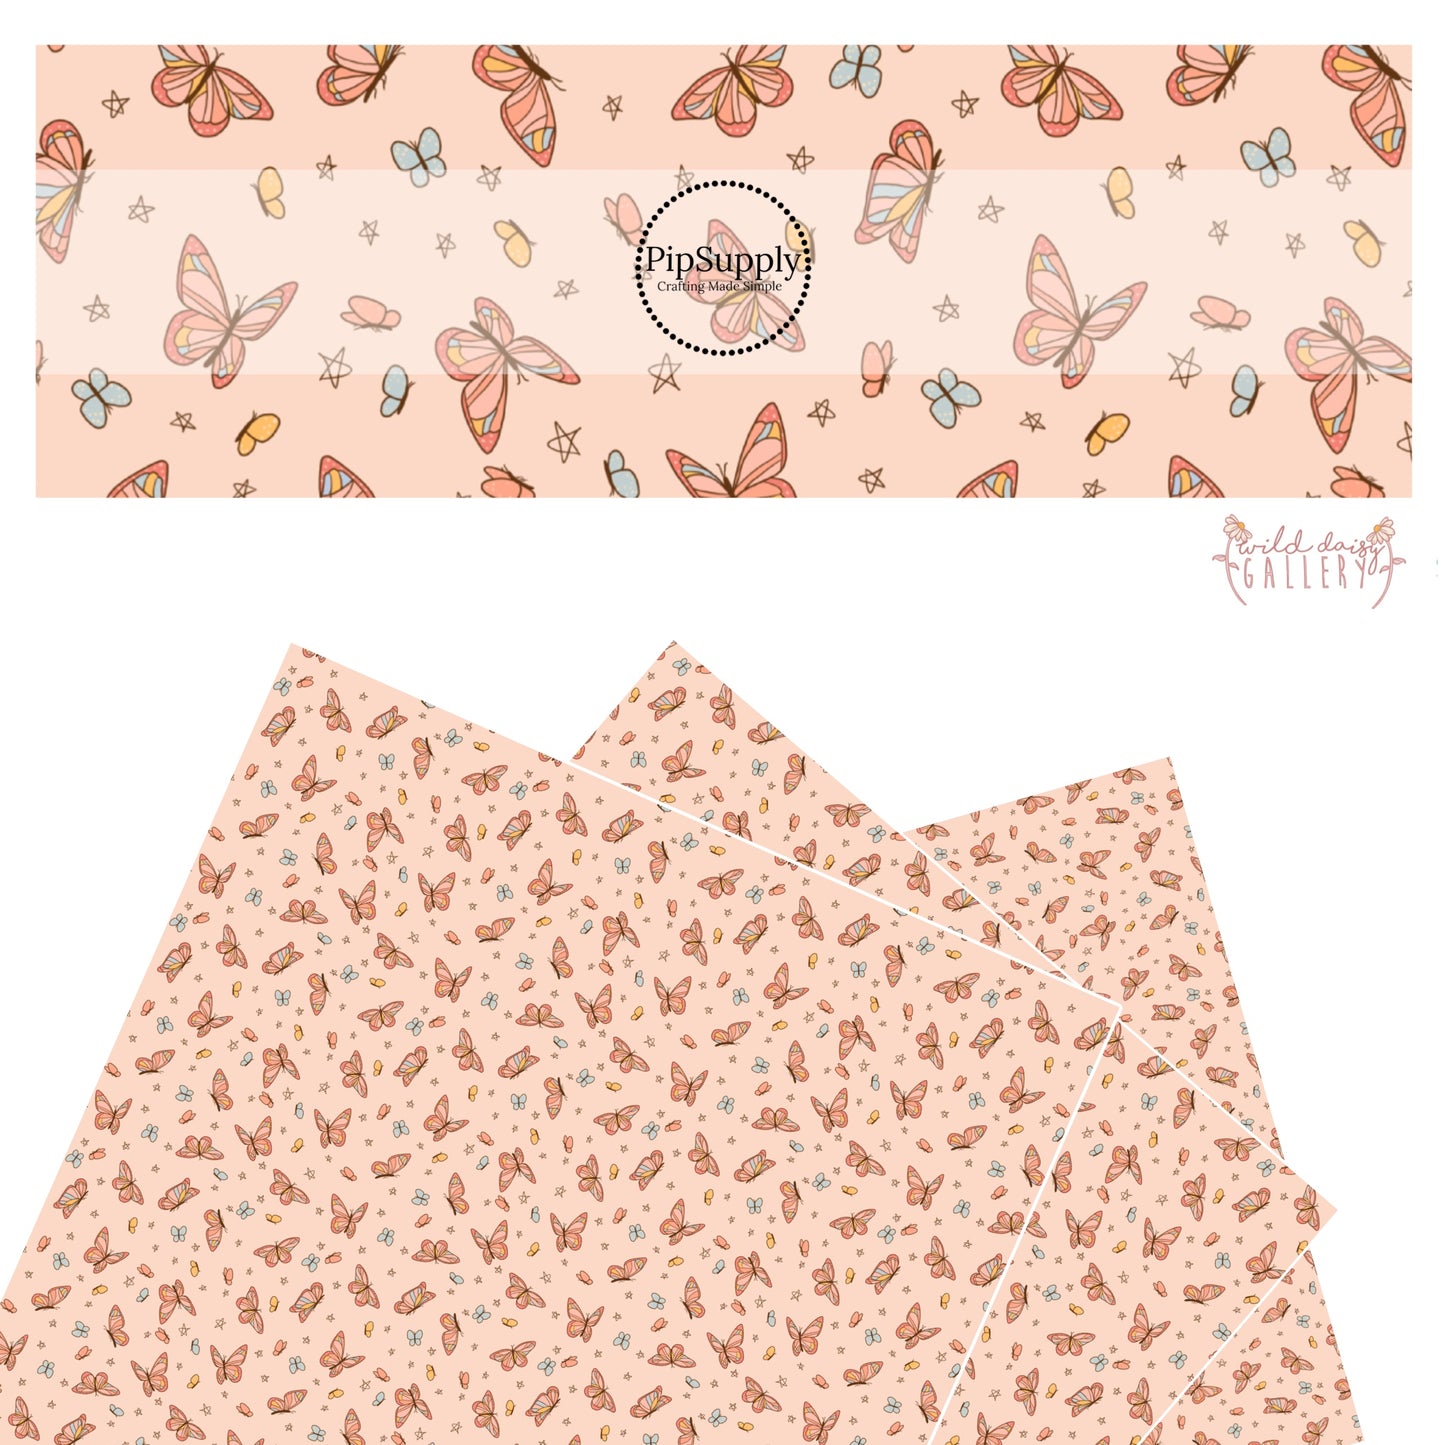 These butterfly themed light peachy cream faux leather sheets contain the following design elements: small butterflies in light orange and light blue and larger colorful butterflies.